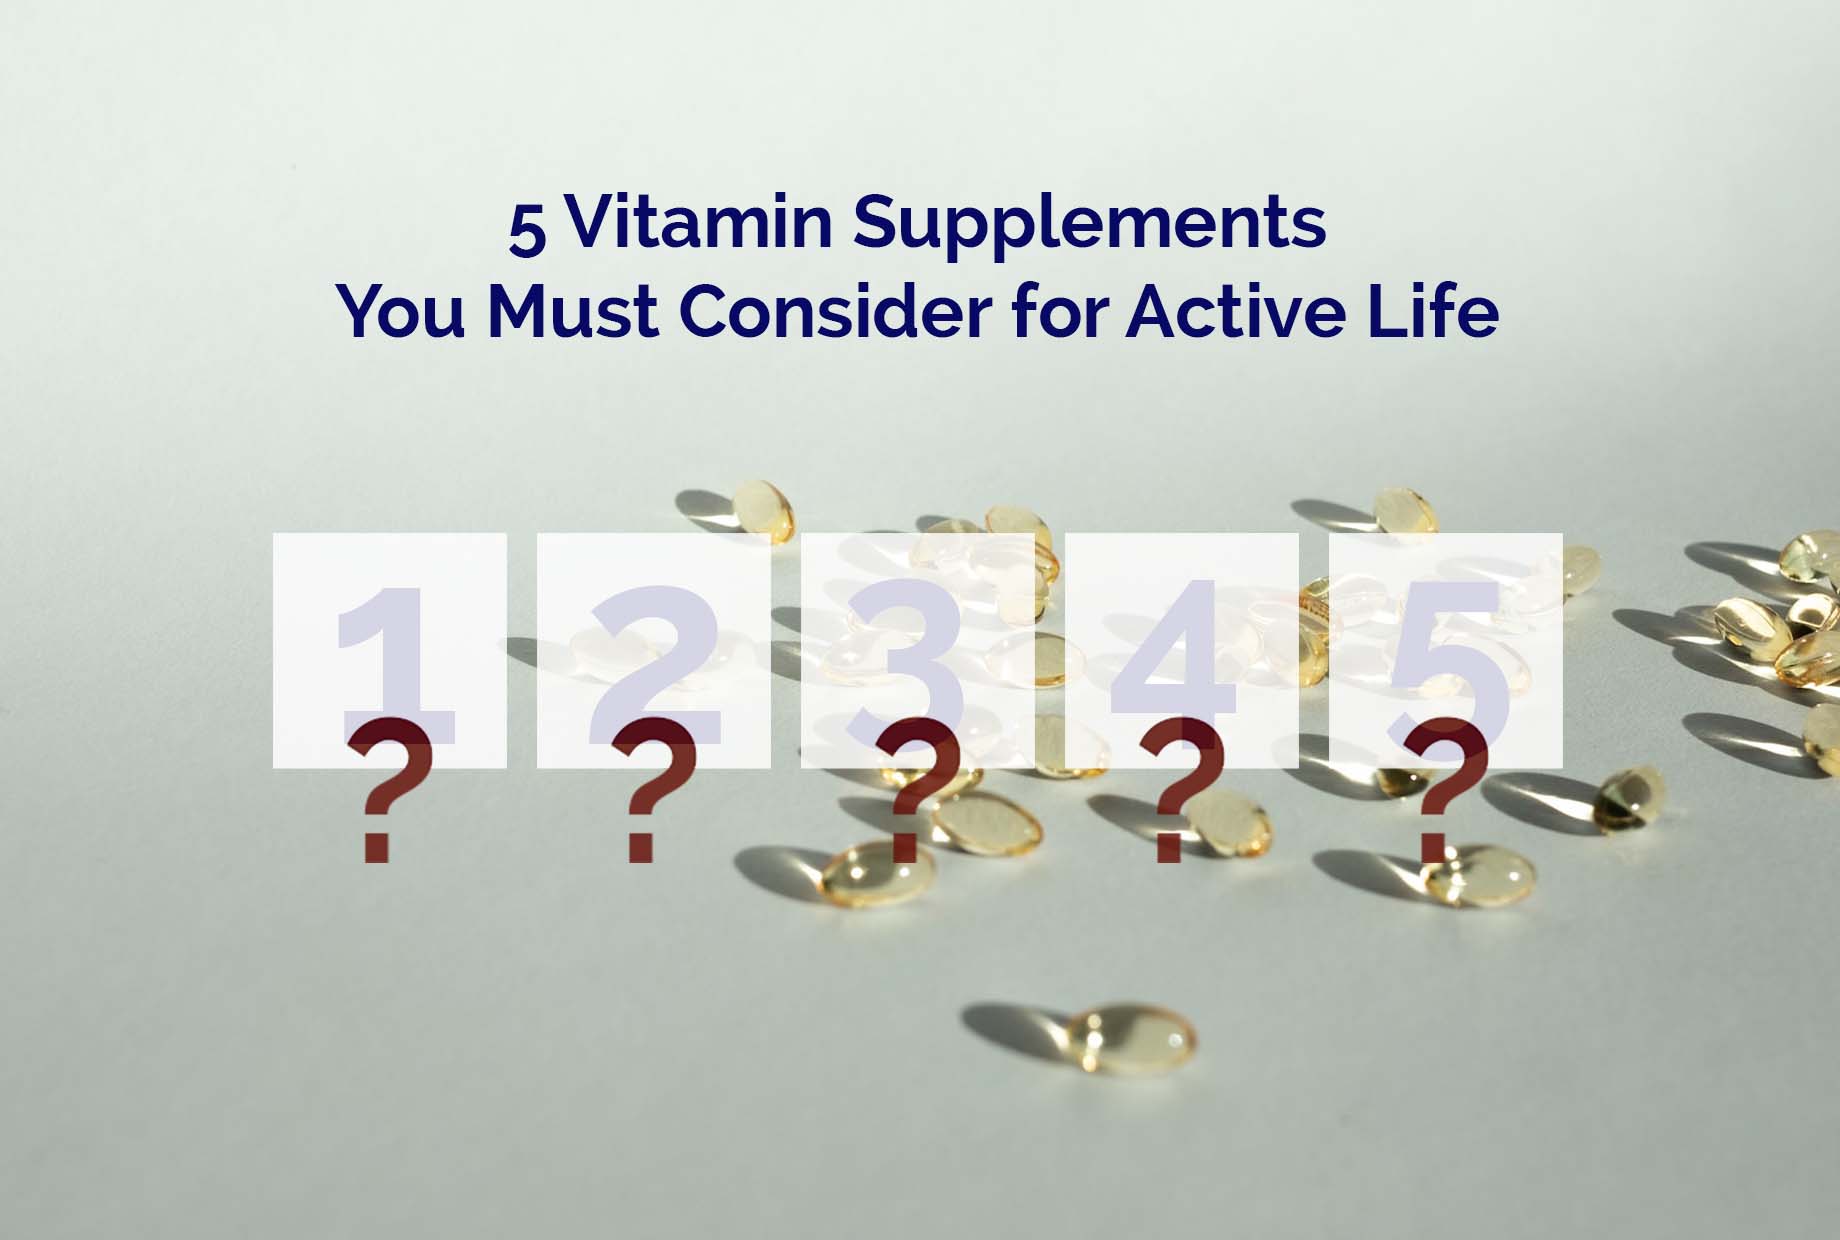 5 Vitamin Supplements You Must Consider for Active Life